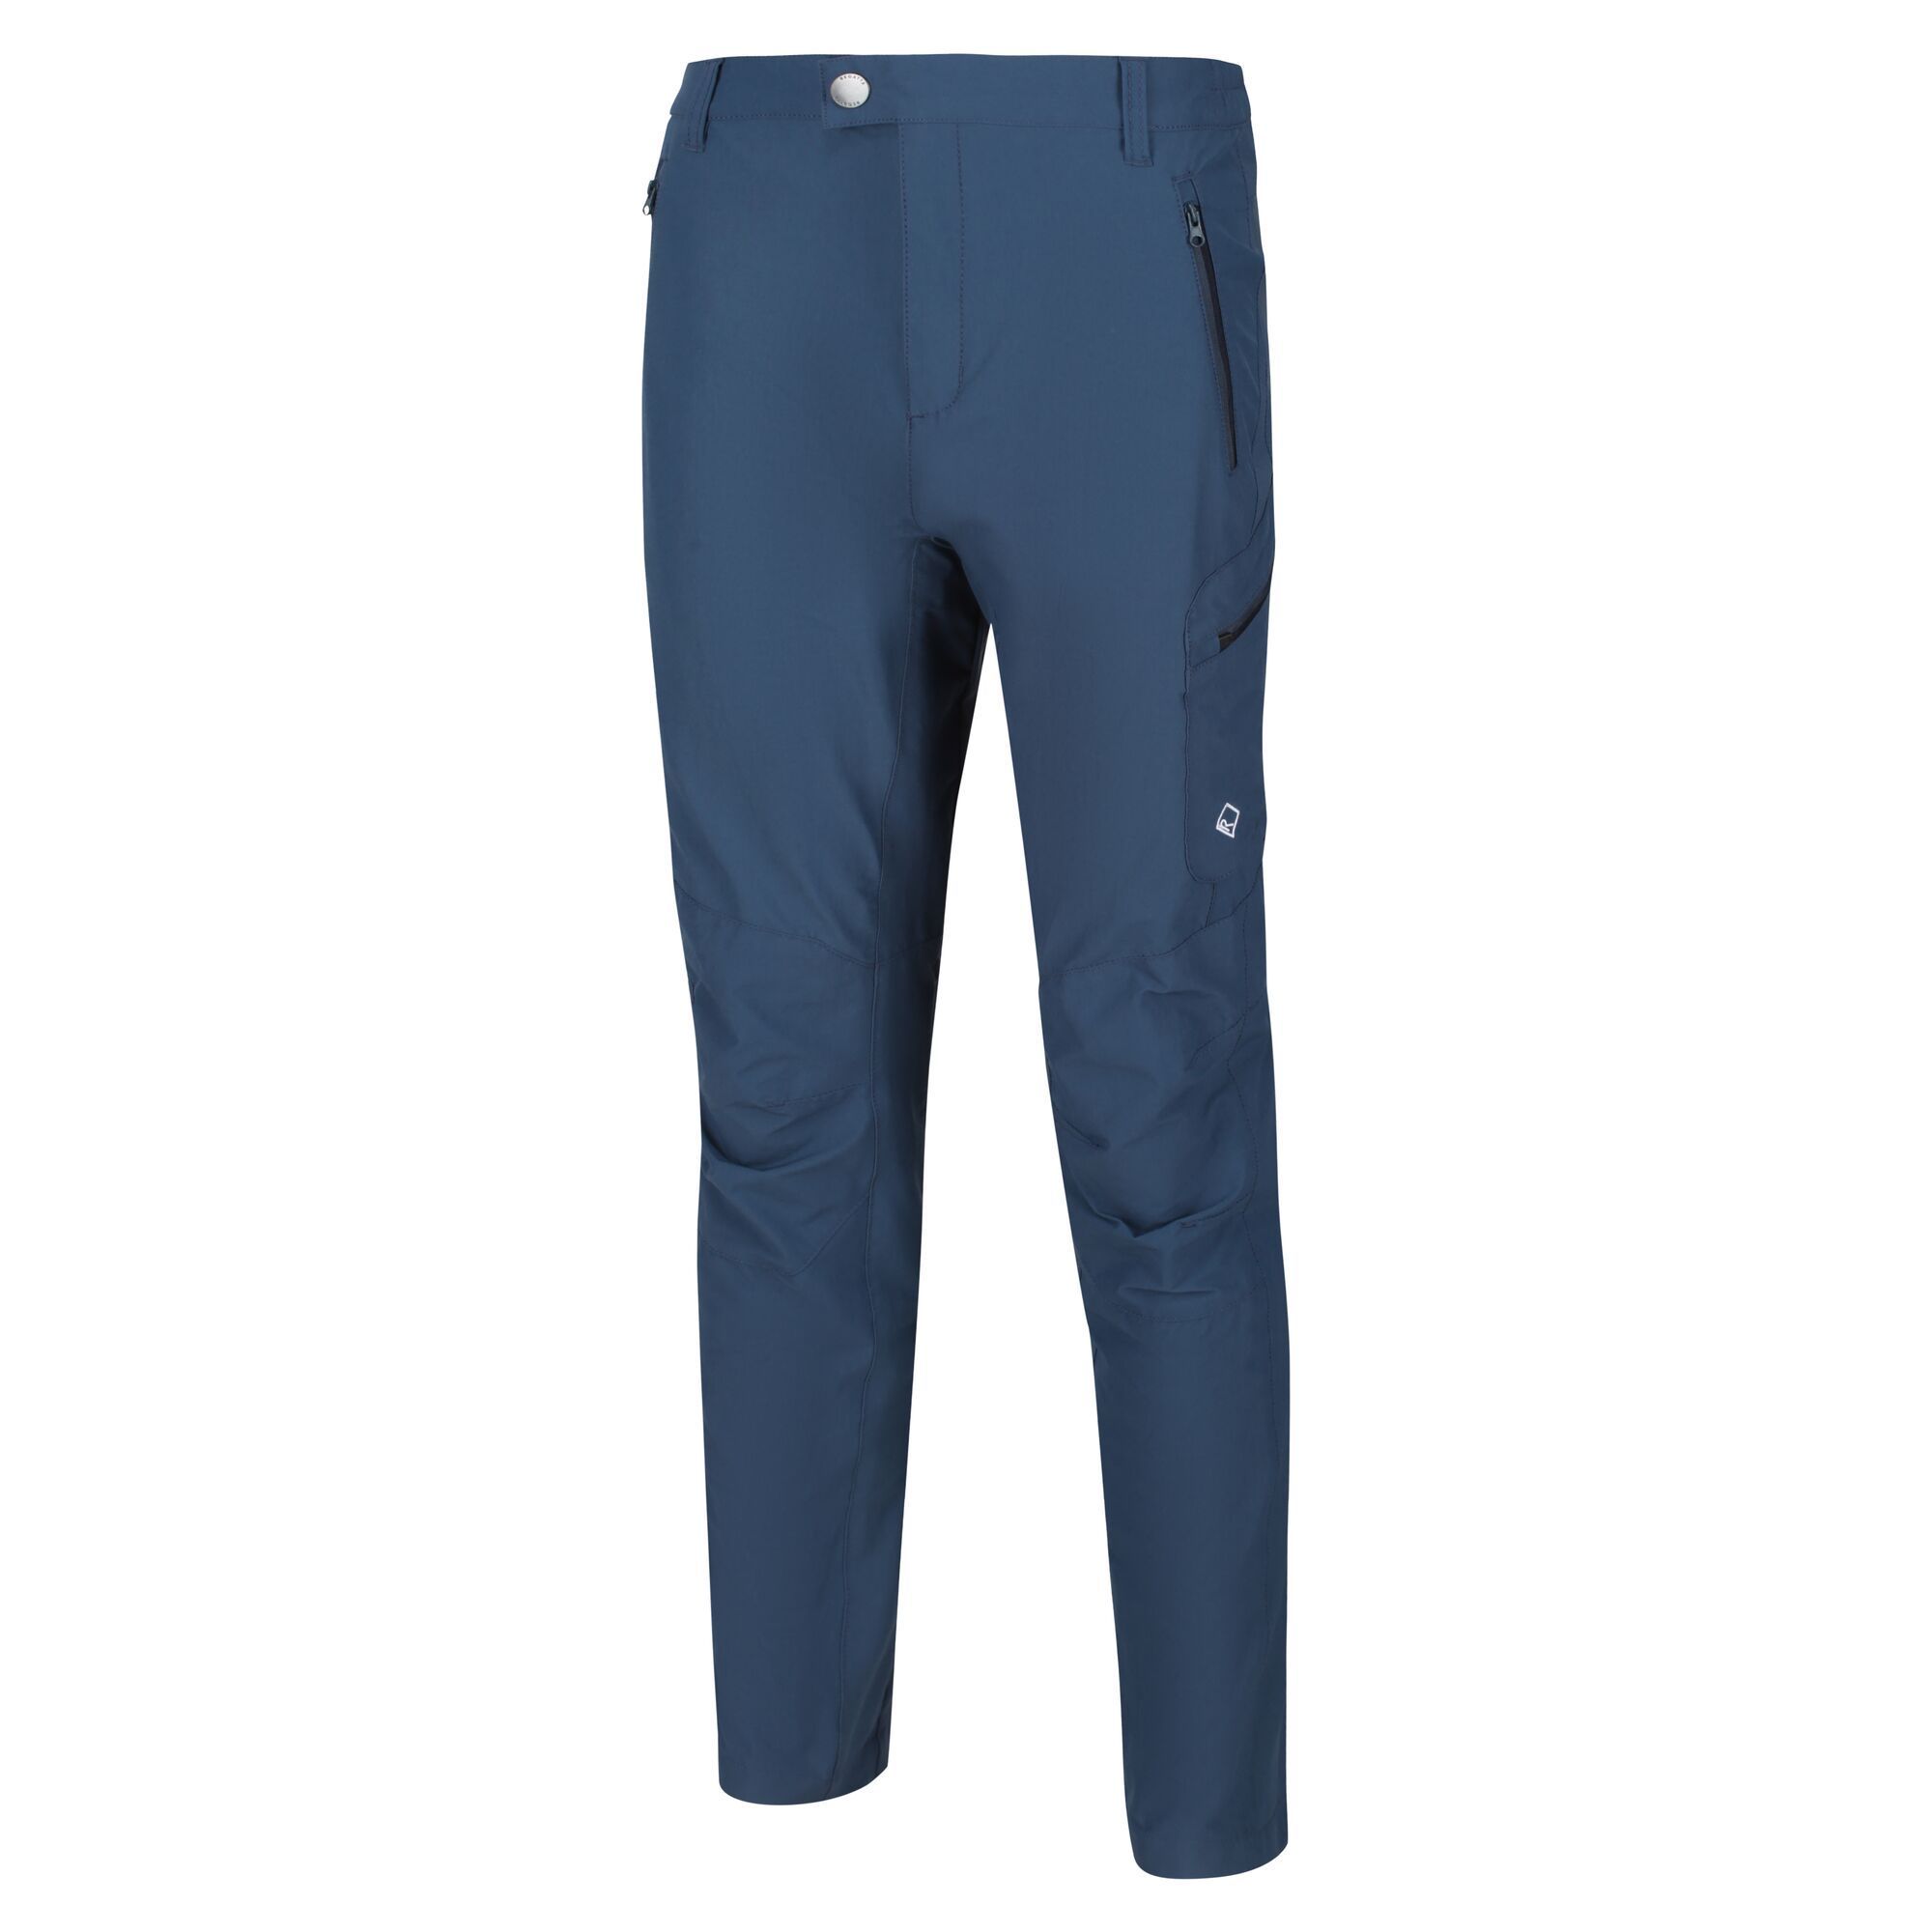 Material: 92% Polyamide, 8% Elastane. Weather-resistant, lightweight and full-stretch ISOFLEX straight leg cut trousers. UPF 40+ sun protection built-in. Front and back pockets with zip fastenings with easy-grab pullers. Ideal for changeable weather conditions. Regatta logo tab on the waist.